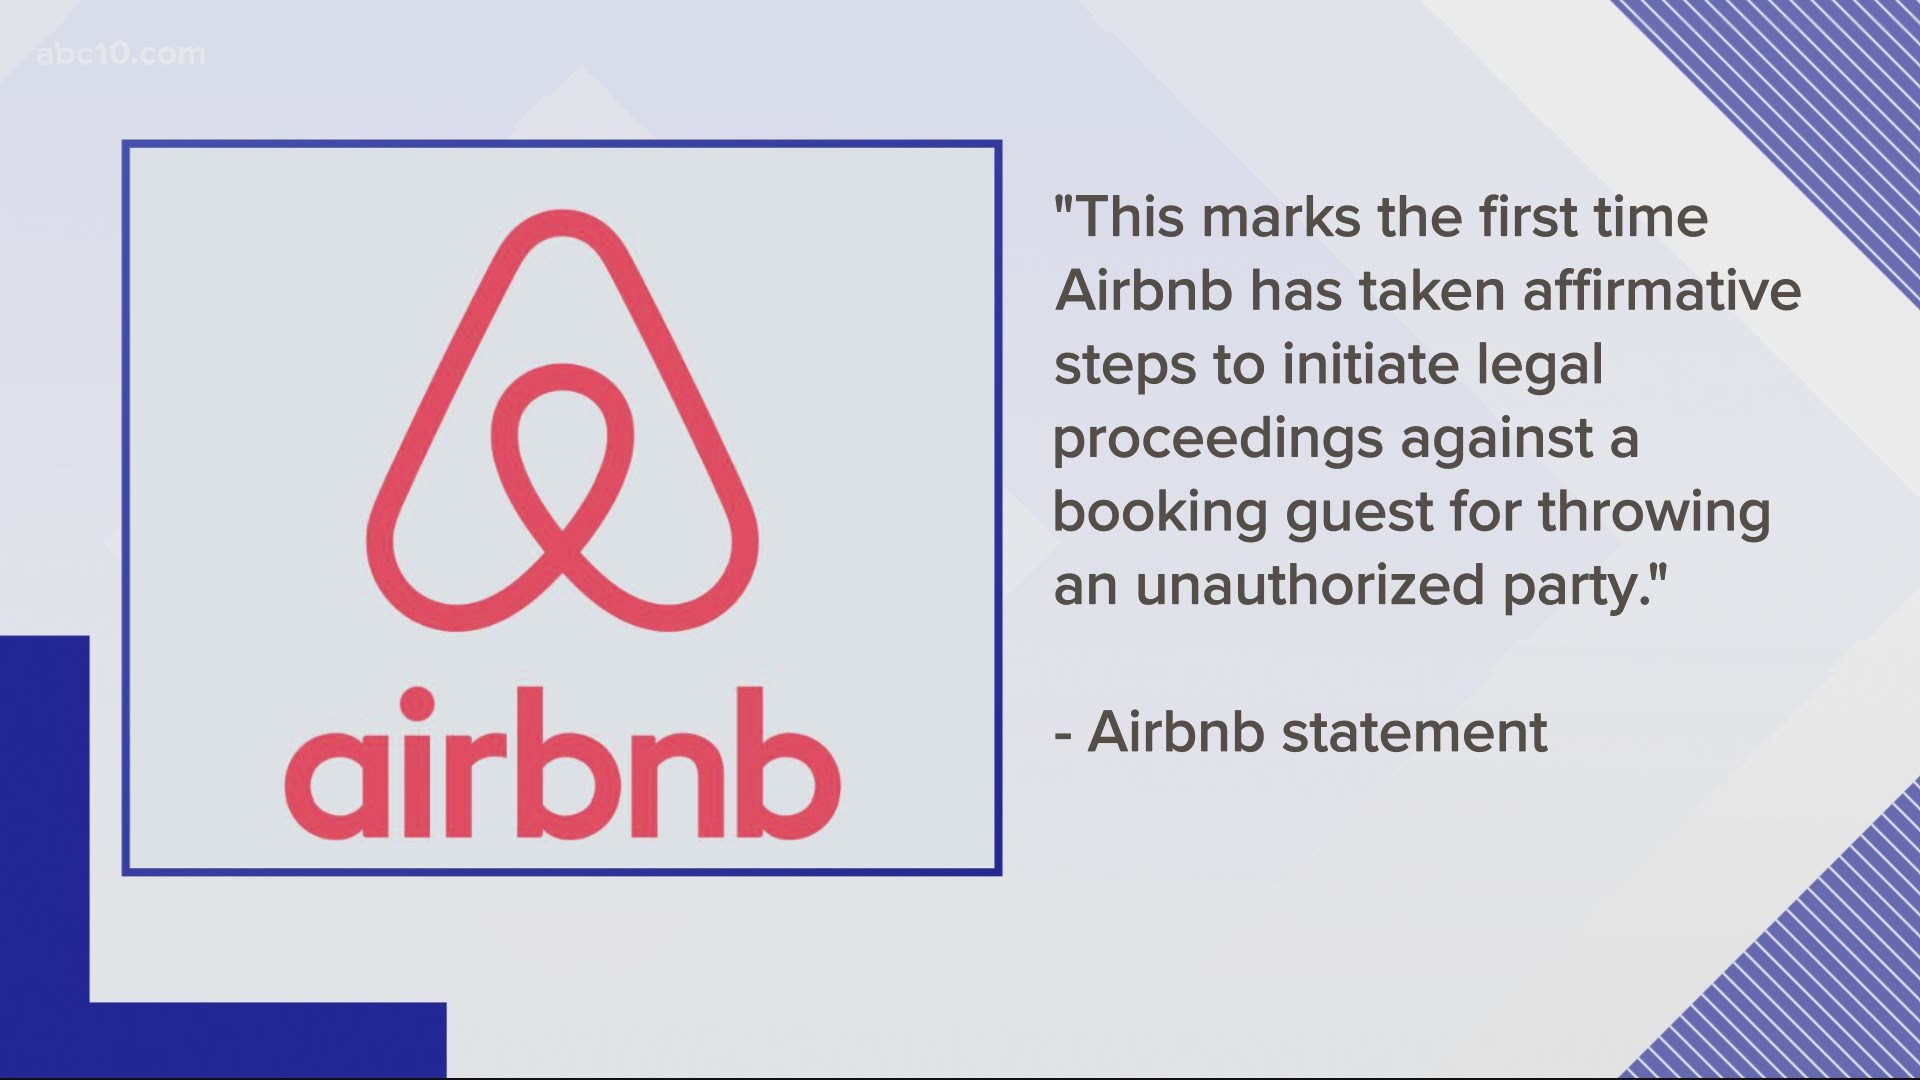 It is the first time the company has taken legal action against a guest for throwing an unauthorized party, Airbnb said in a press release.